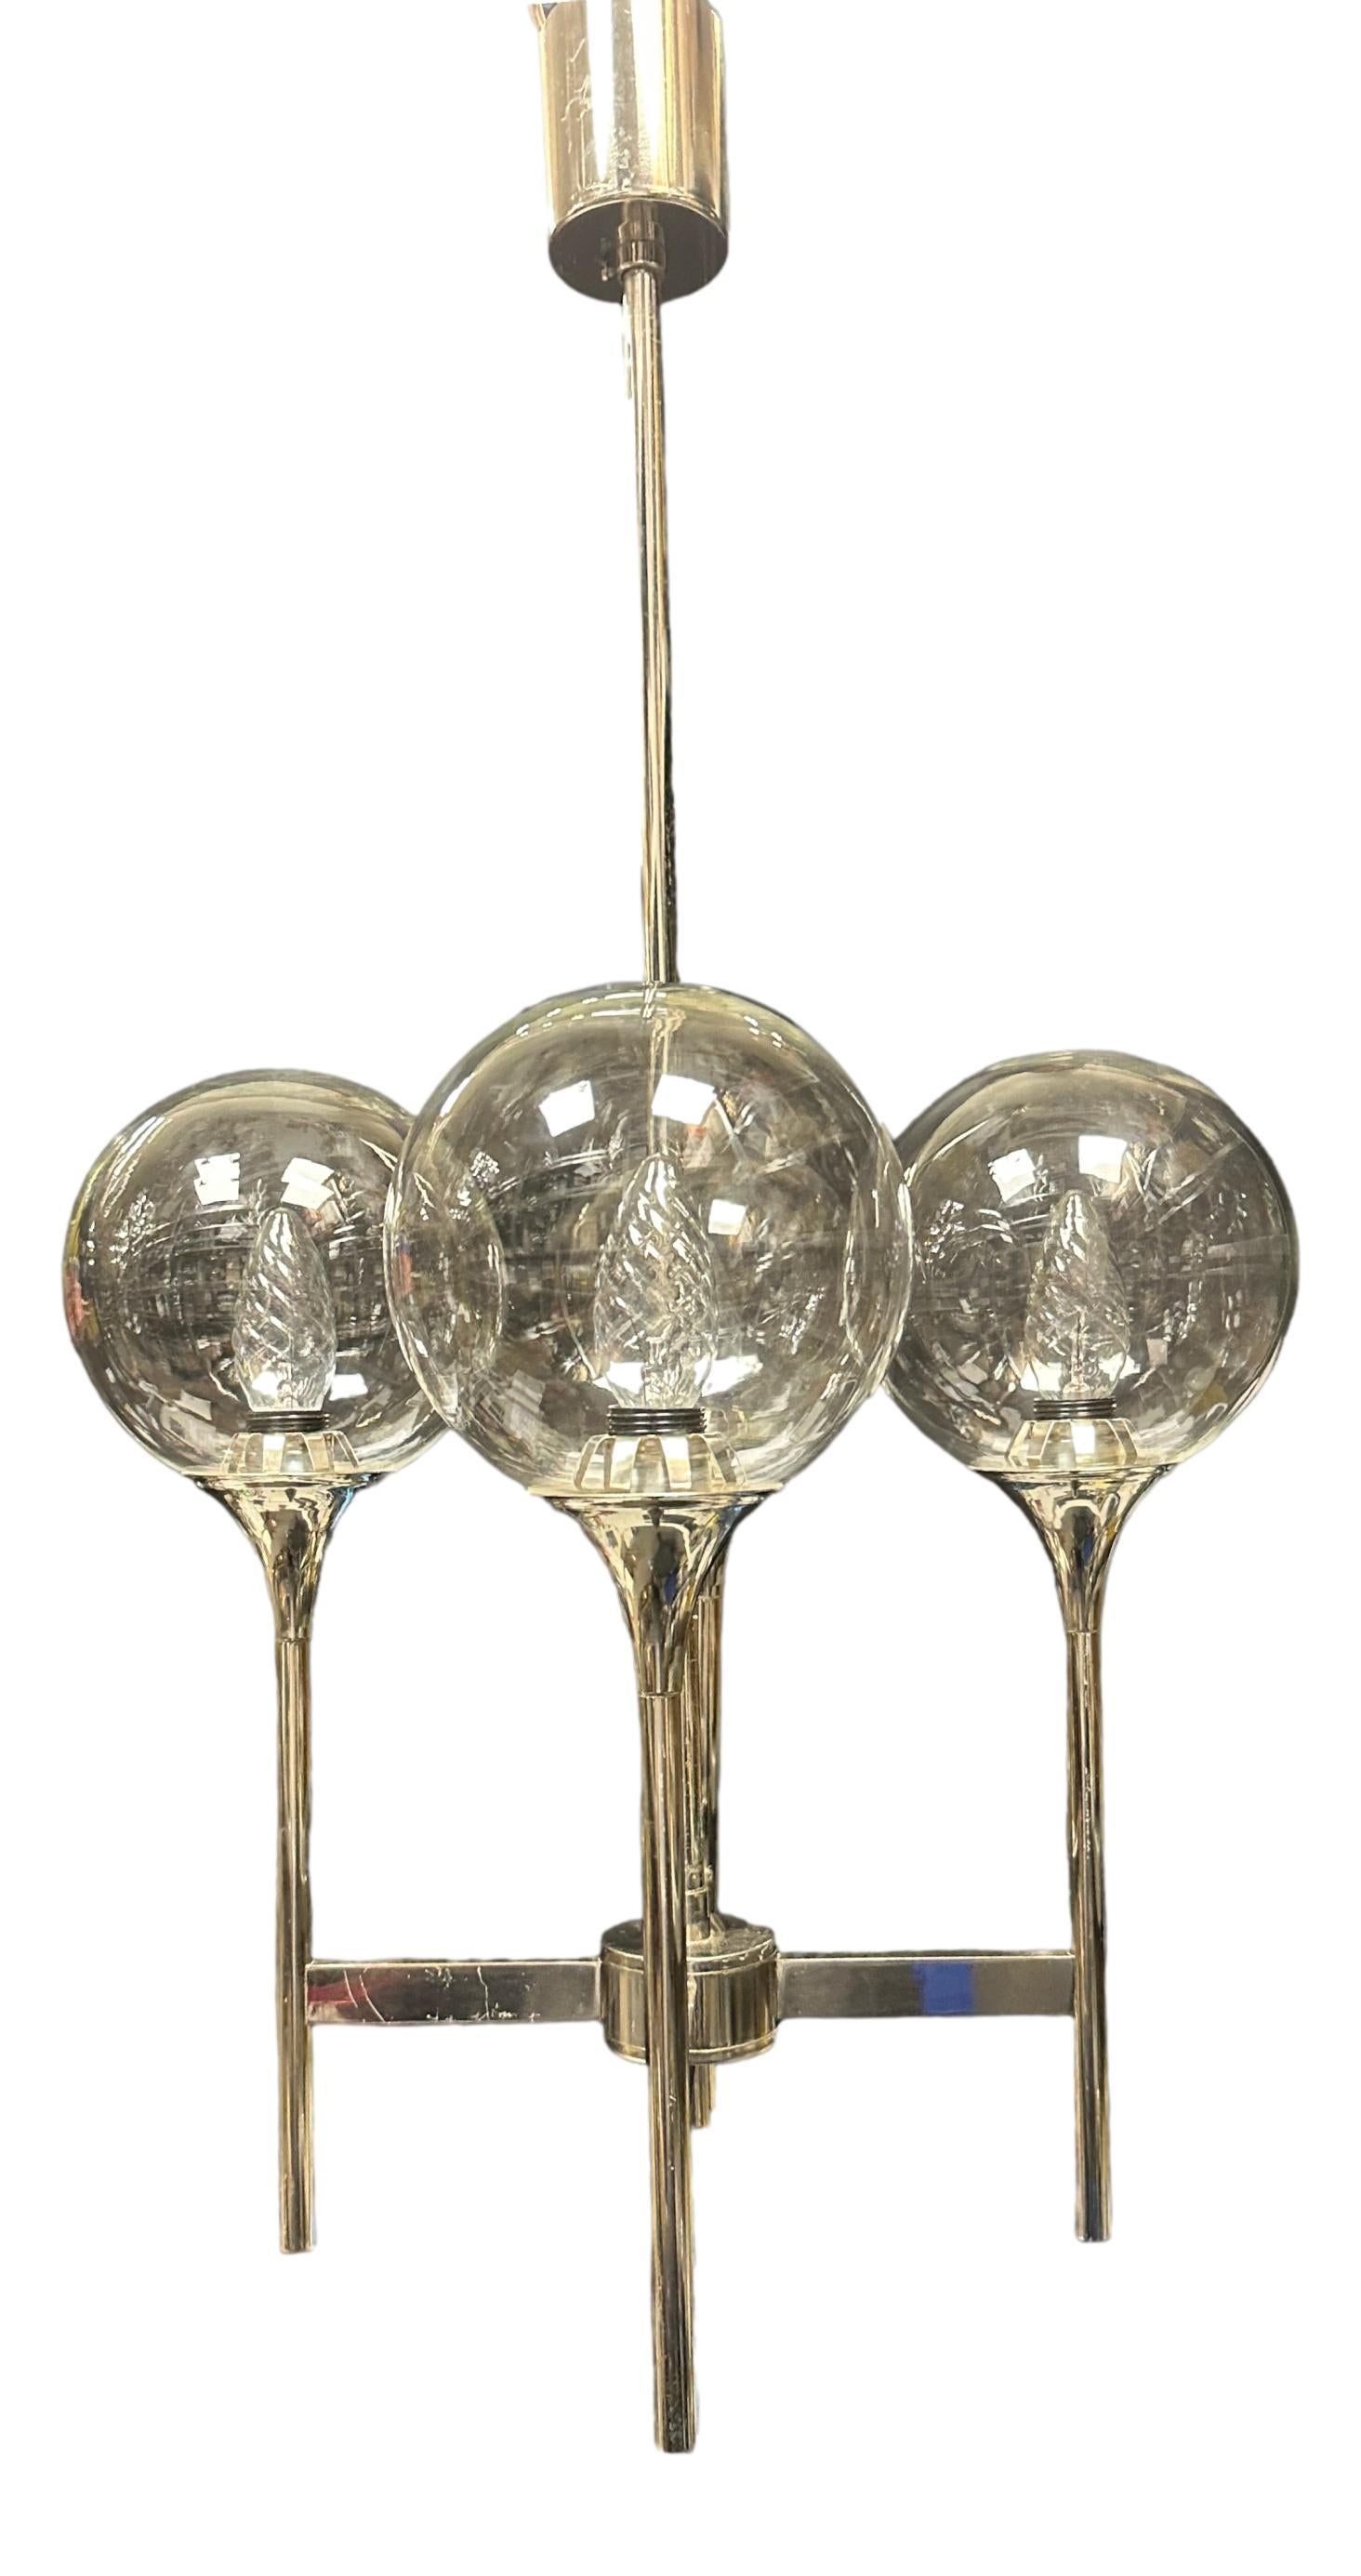 Pair of Reggiani Sciolari Style 1970S 4 Light, Chrome and Glass Ball Chandelier For Sale 6